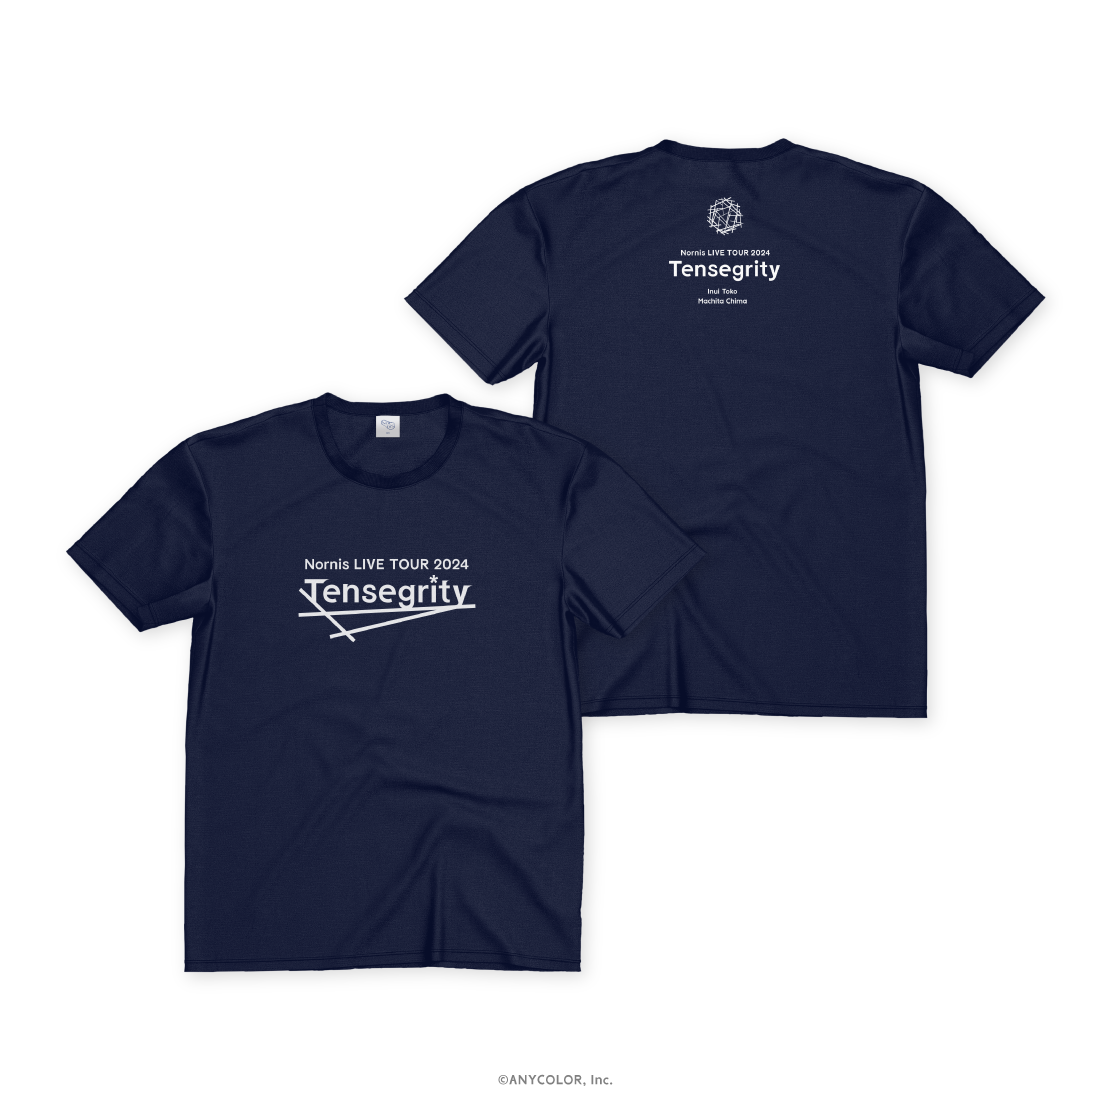 【Nornis LIVE TOUR 2024 -Tensegrity-】Tシャツ ライバー 関連タグ 商品を選択